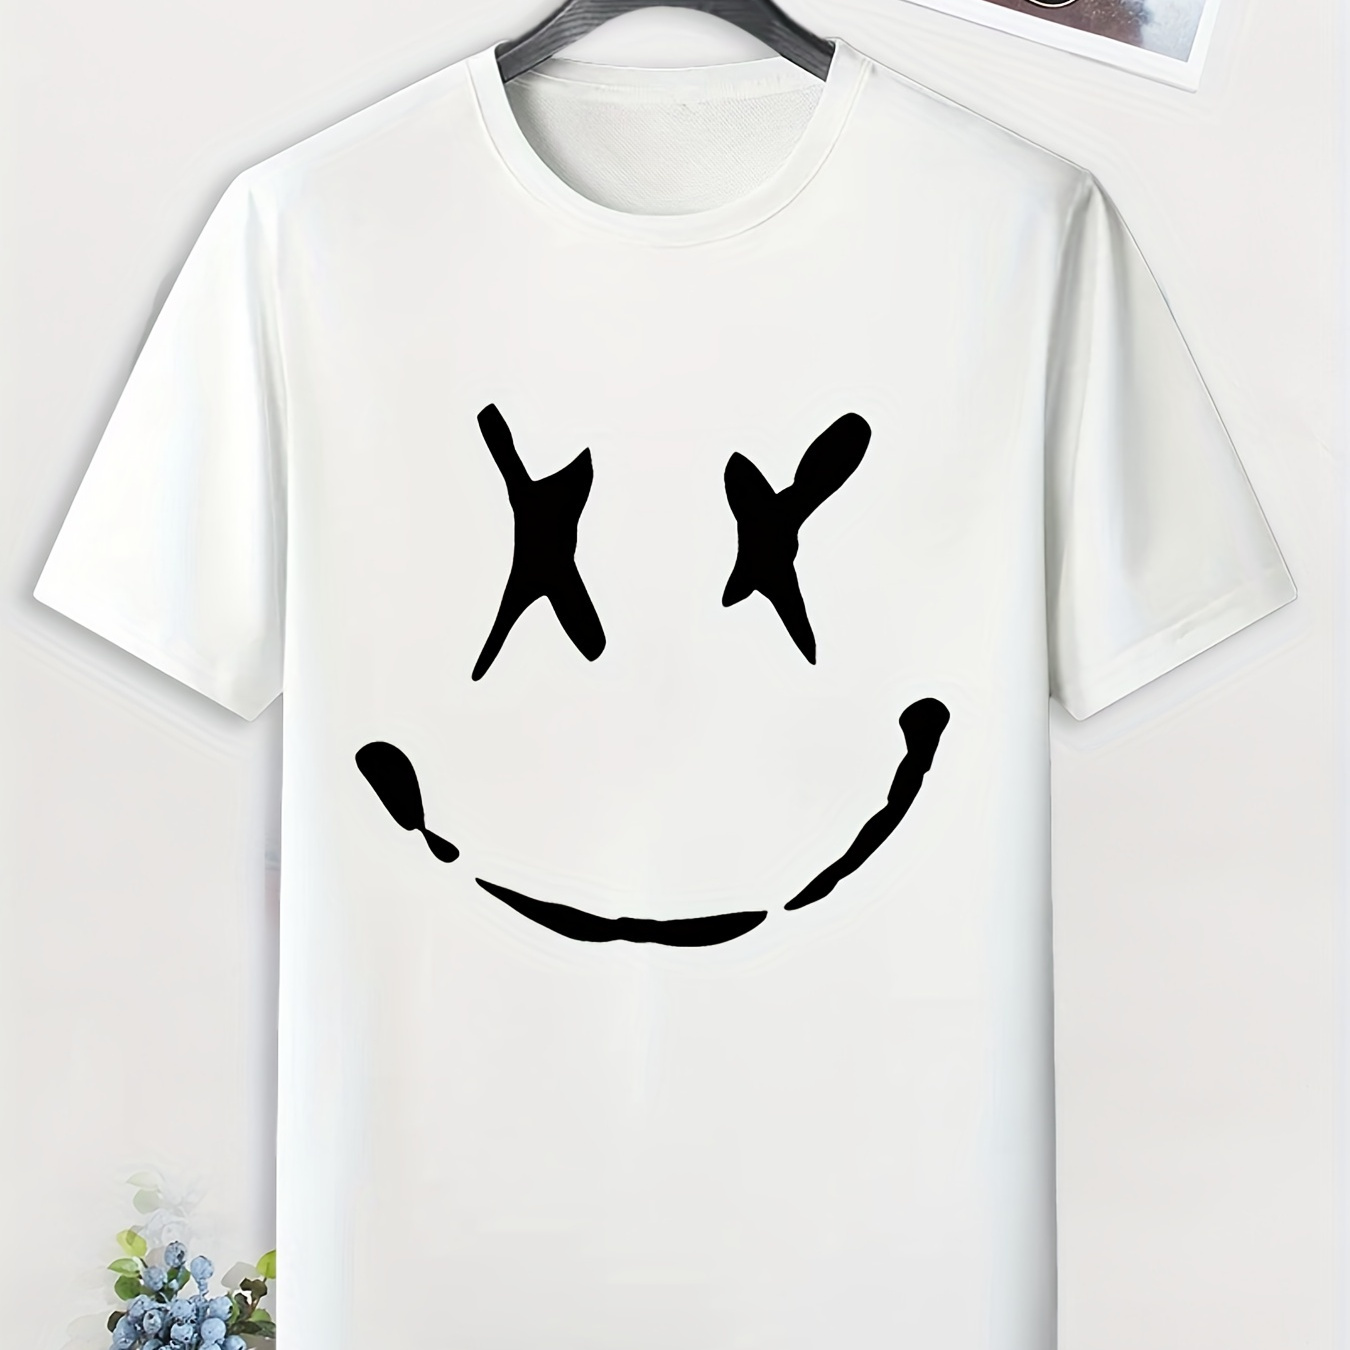 

Men's Graffiti Smile Print T-shirt, Active Slightly Stretch Breathable Tee For Outdoor